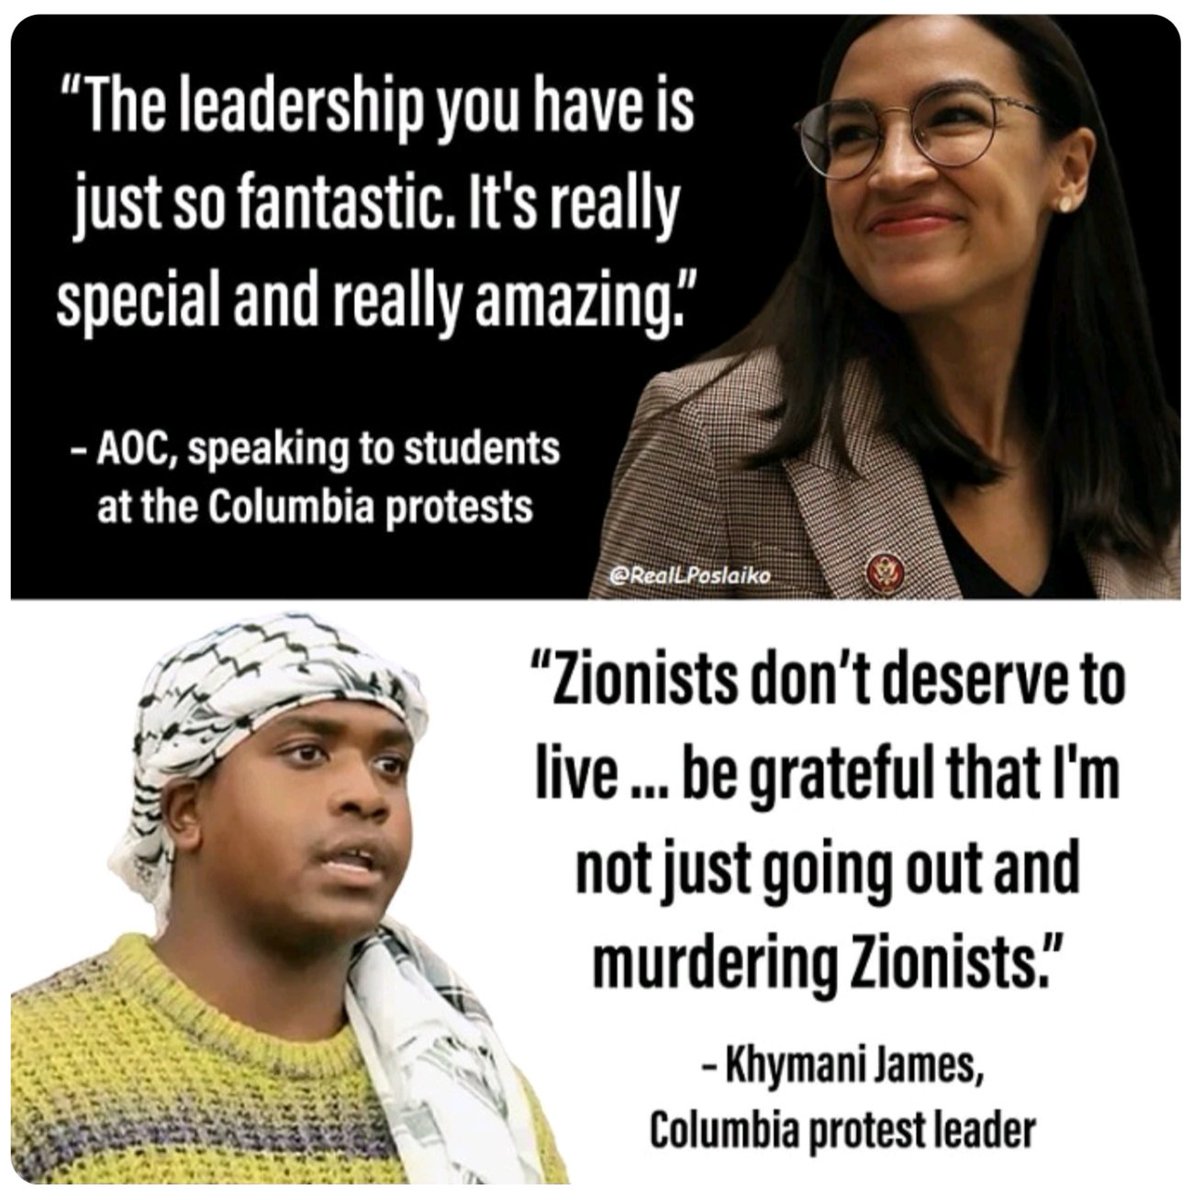 AOC ... A paragon of the community she represents.